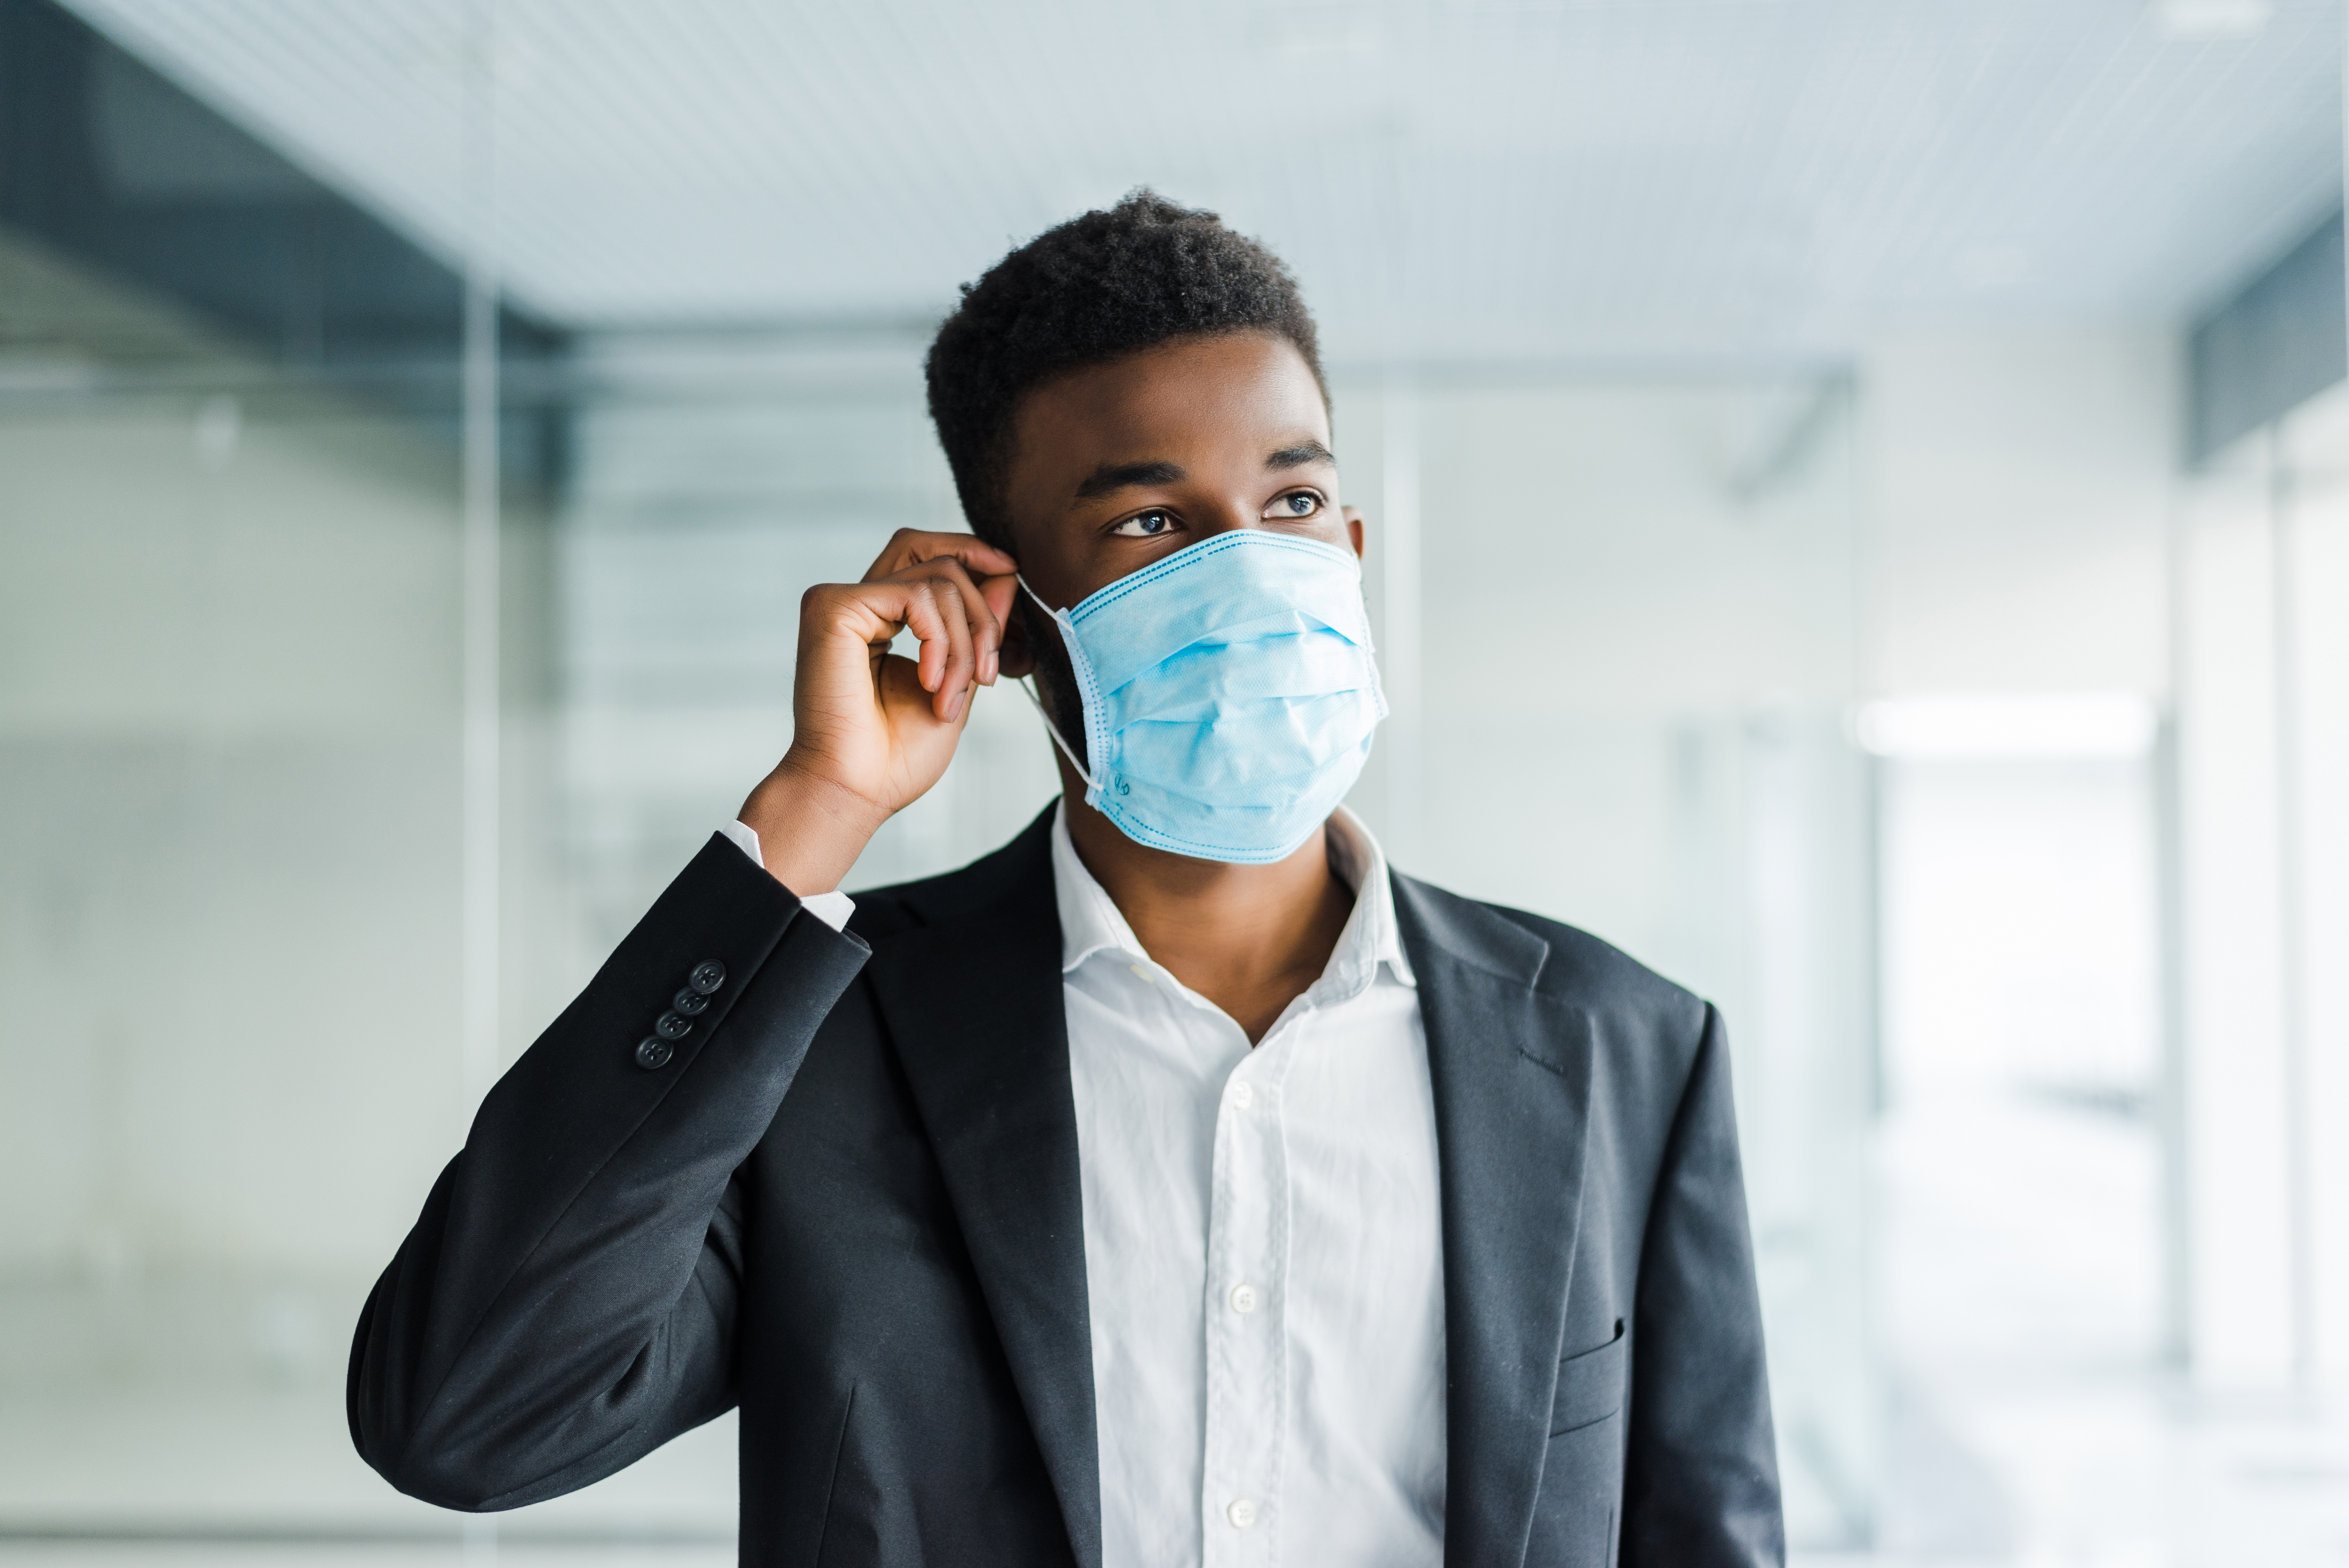 Wear face coverings to limit the possibility of spreading germs.